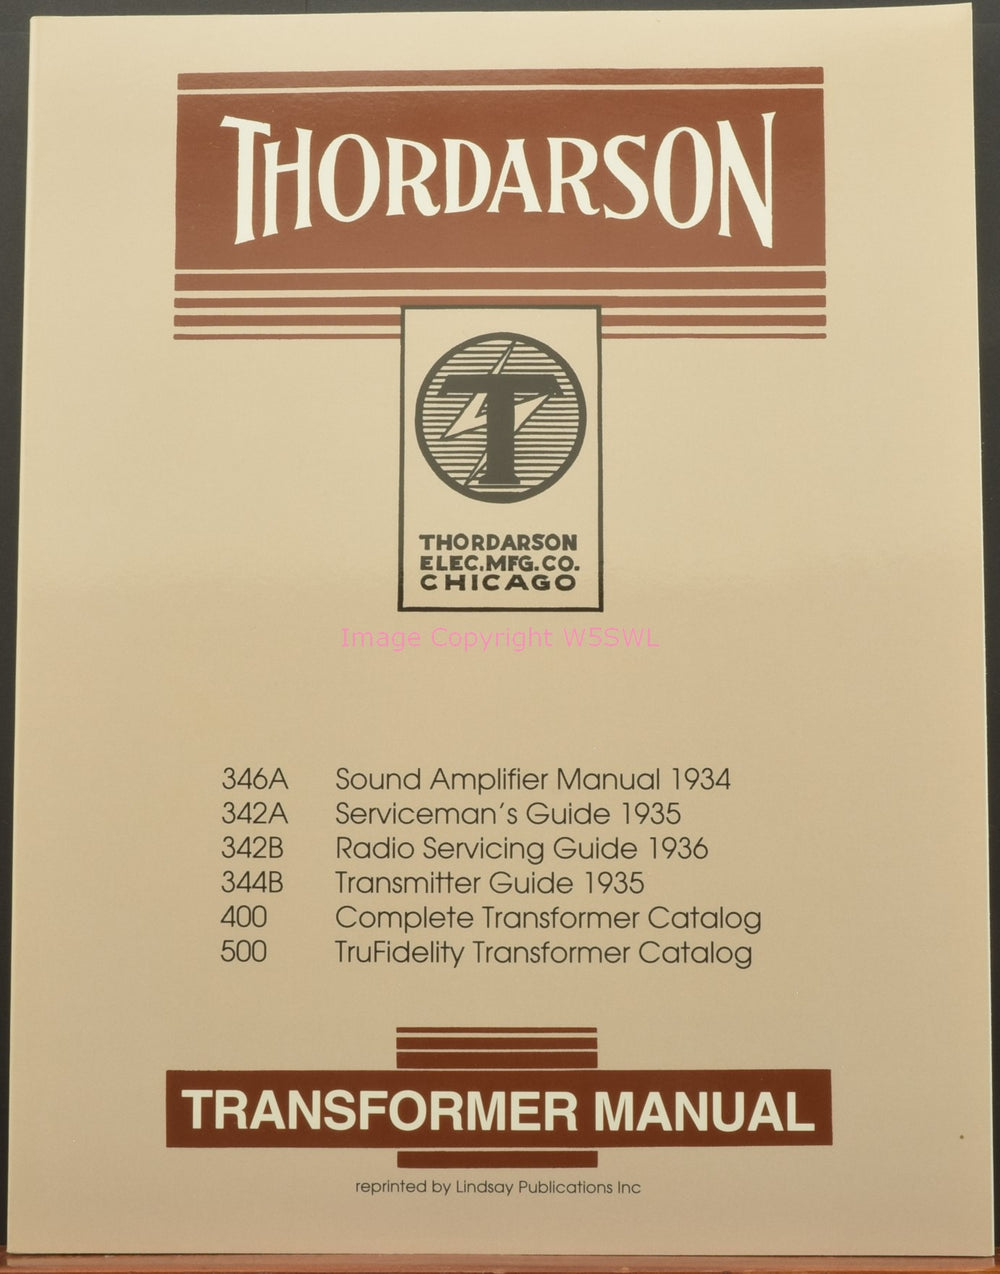 Thordarson Transformer Manual - Dave's Hobby Shop by W5SWL